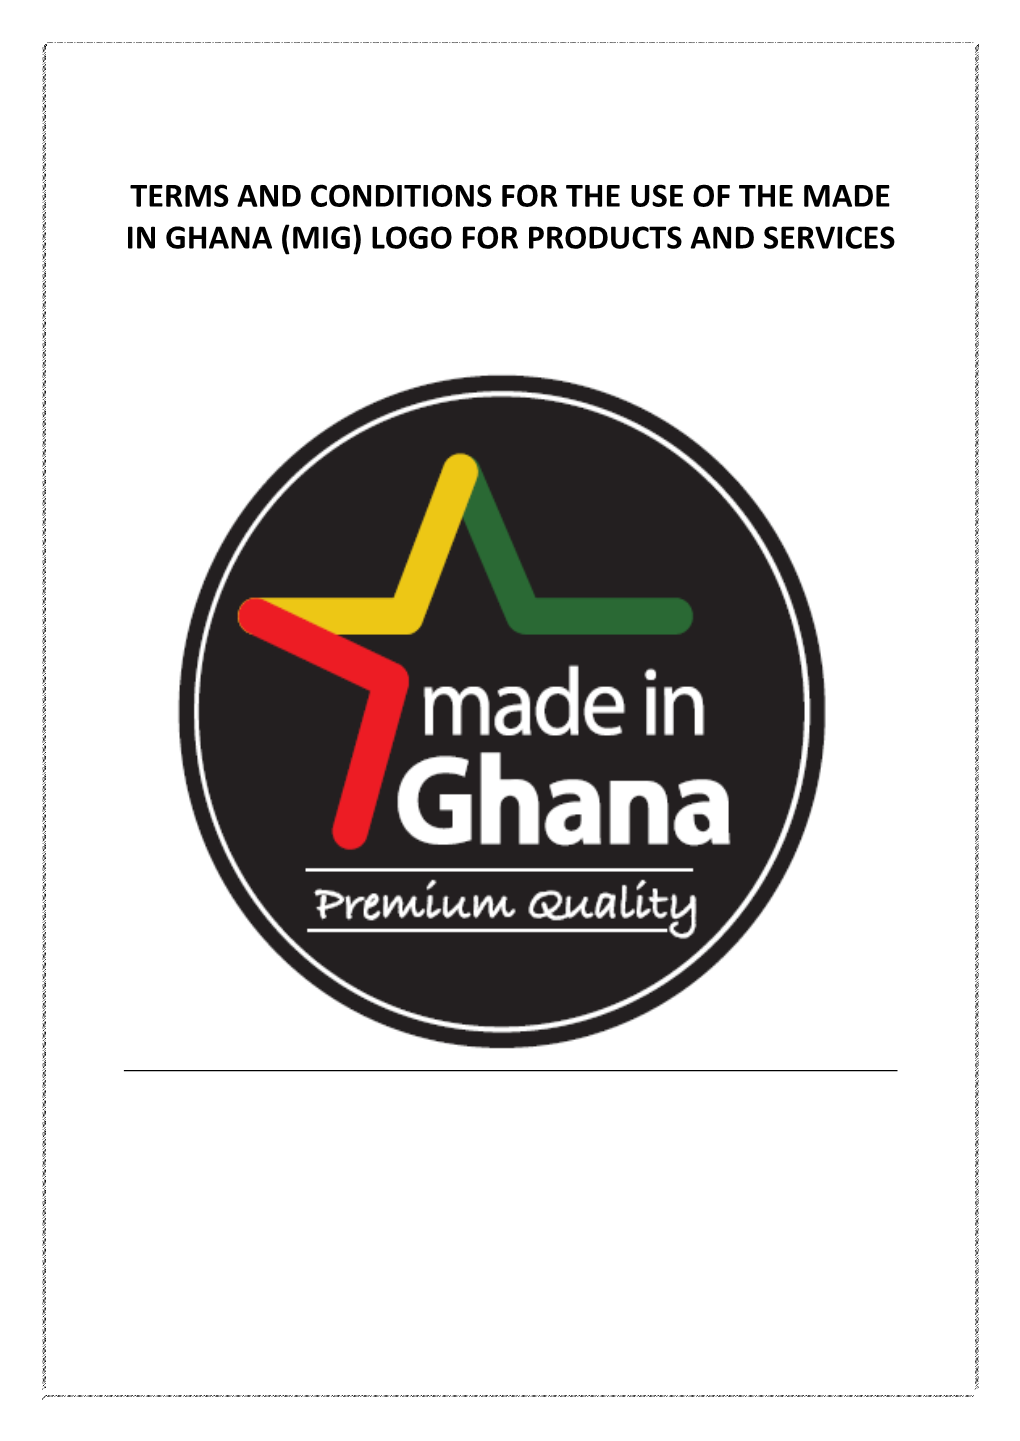 Terms and Conditions for the Use of the Made in Ghana (Mig) Logo for Products and Services